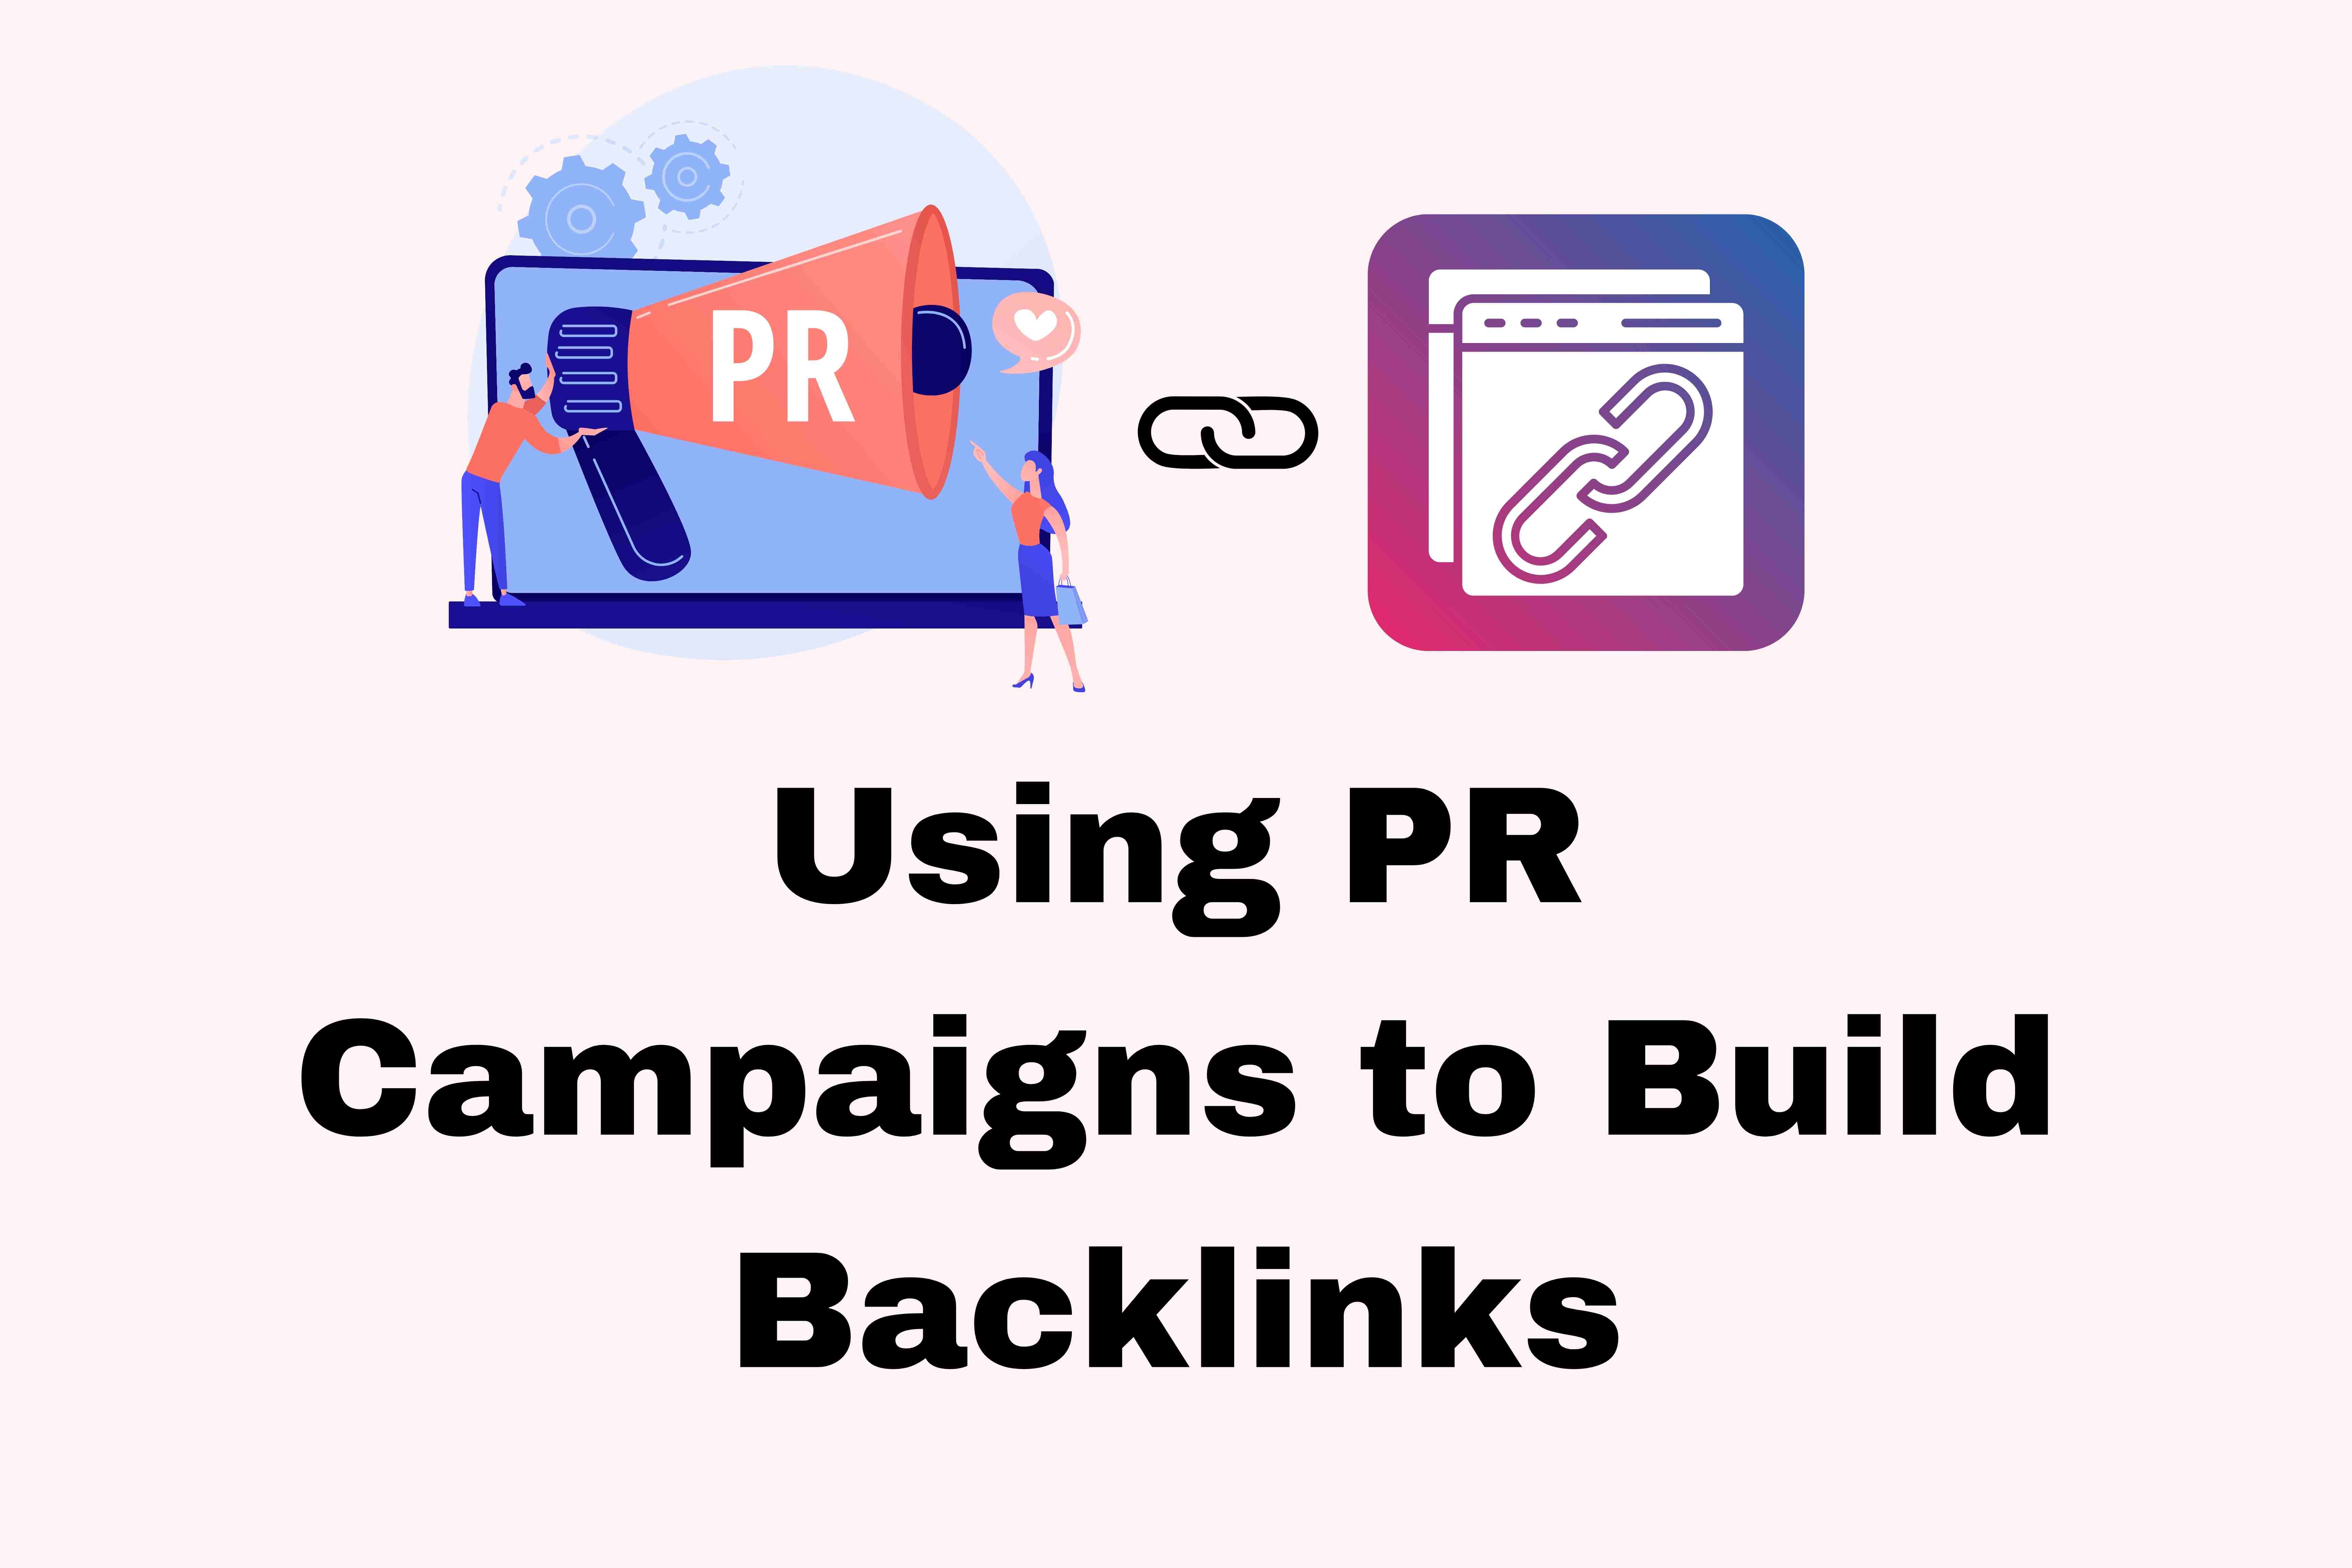 Using PR Campaigns to Build Backlinks